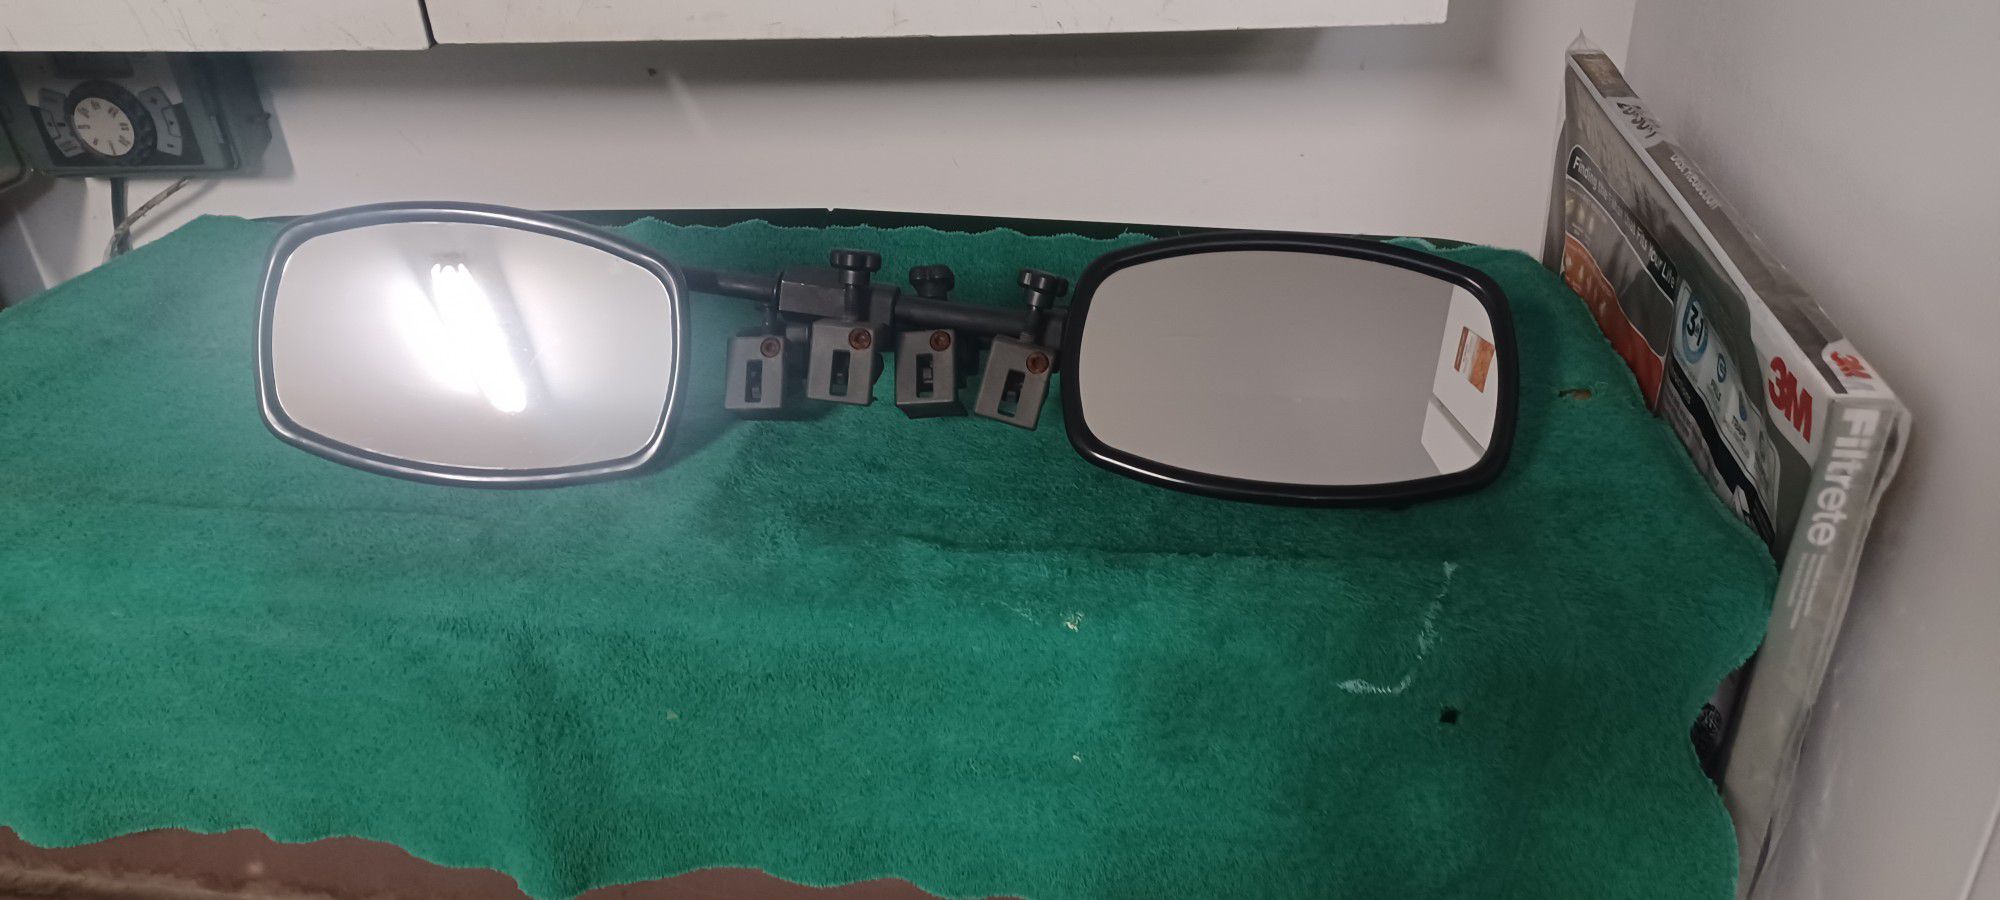 Universal Towing Mirrors 